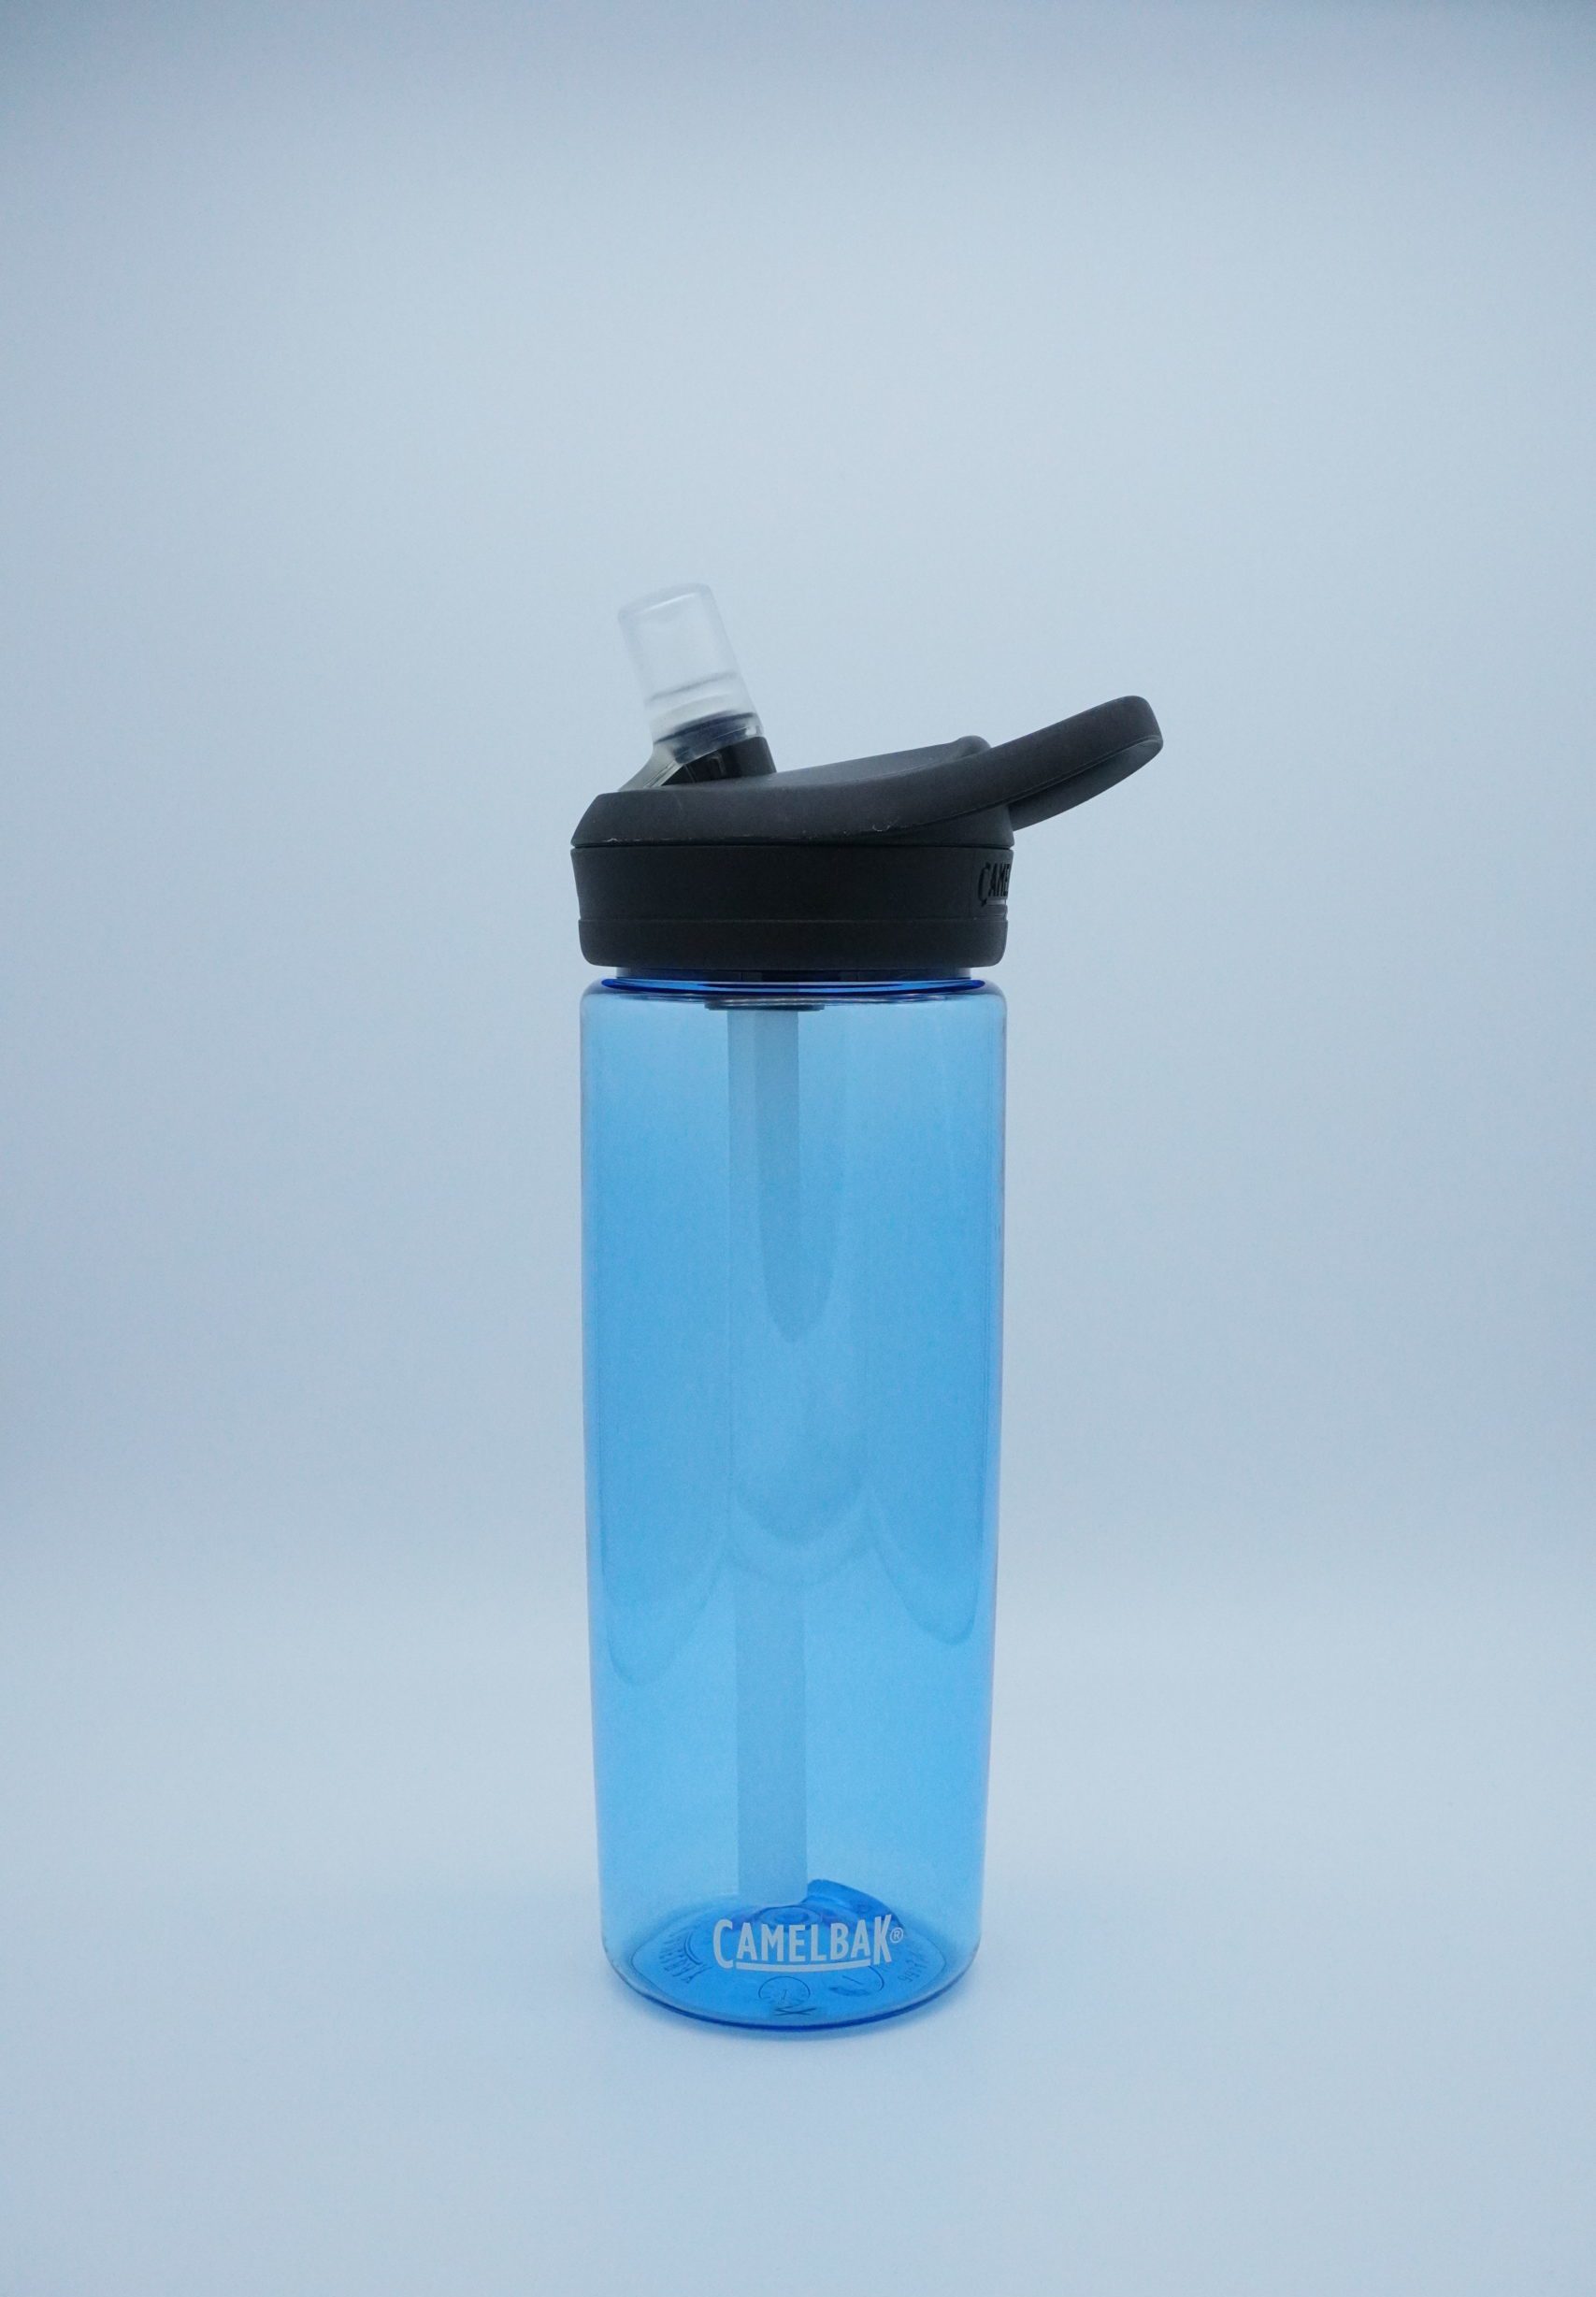 CamelBak Eddy+ Water Bottle Review | HydrationReview